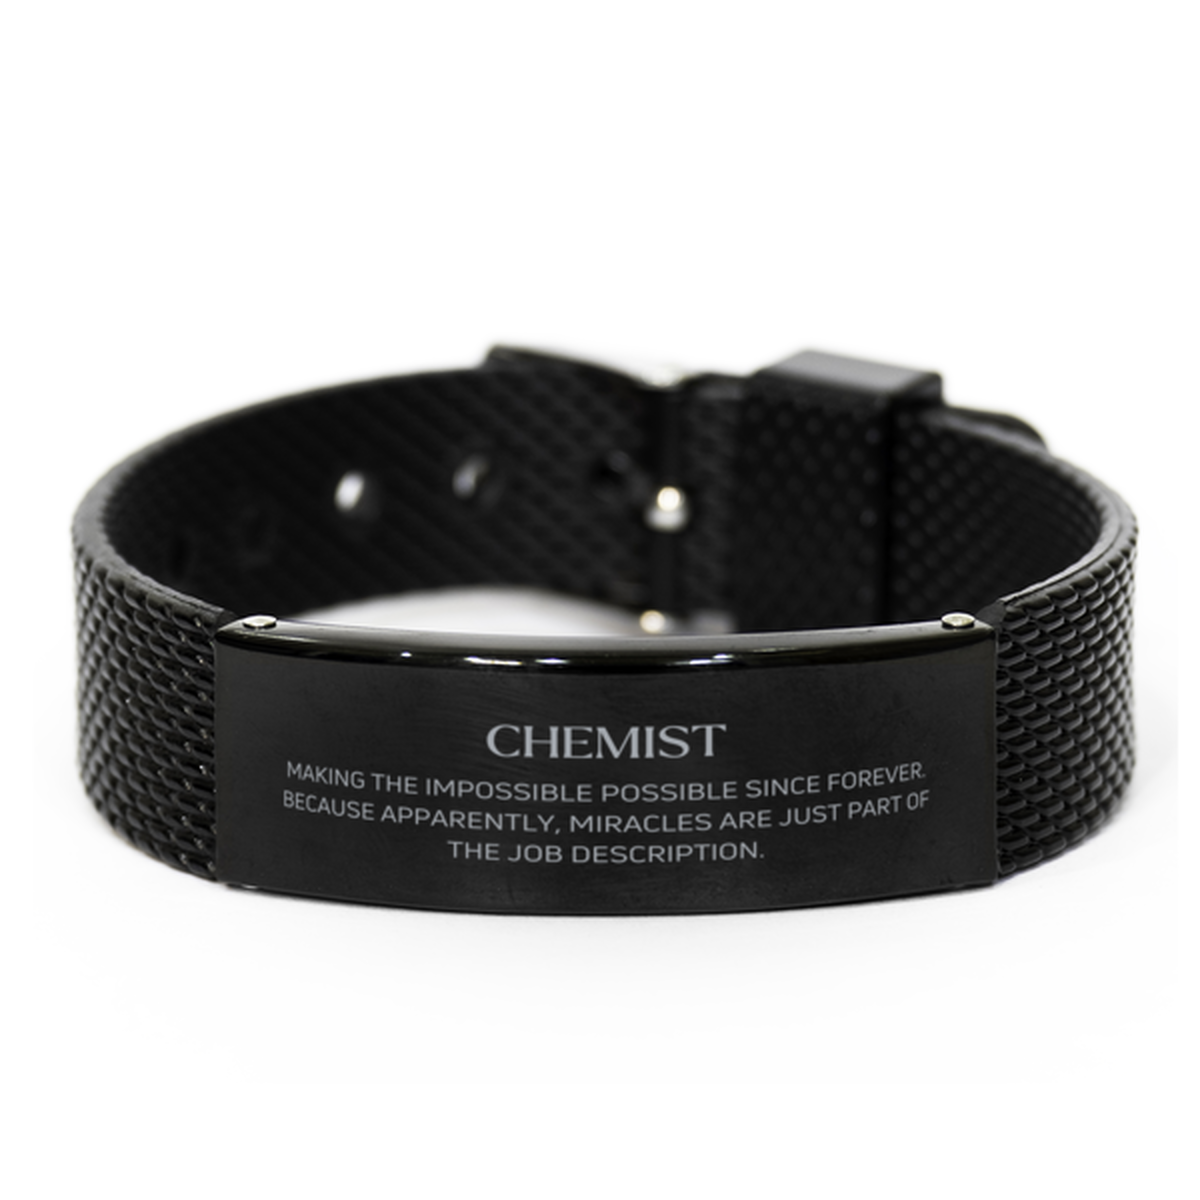 Funny Chemist Gifts, Miracles are just part of the job description, Inspirational Birthday Black Shark Mesh Bracelet For Chemist, Men, Women, Coworkers, Friends, Boss